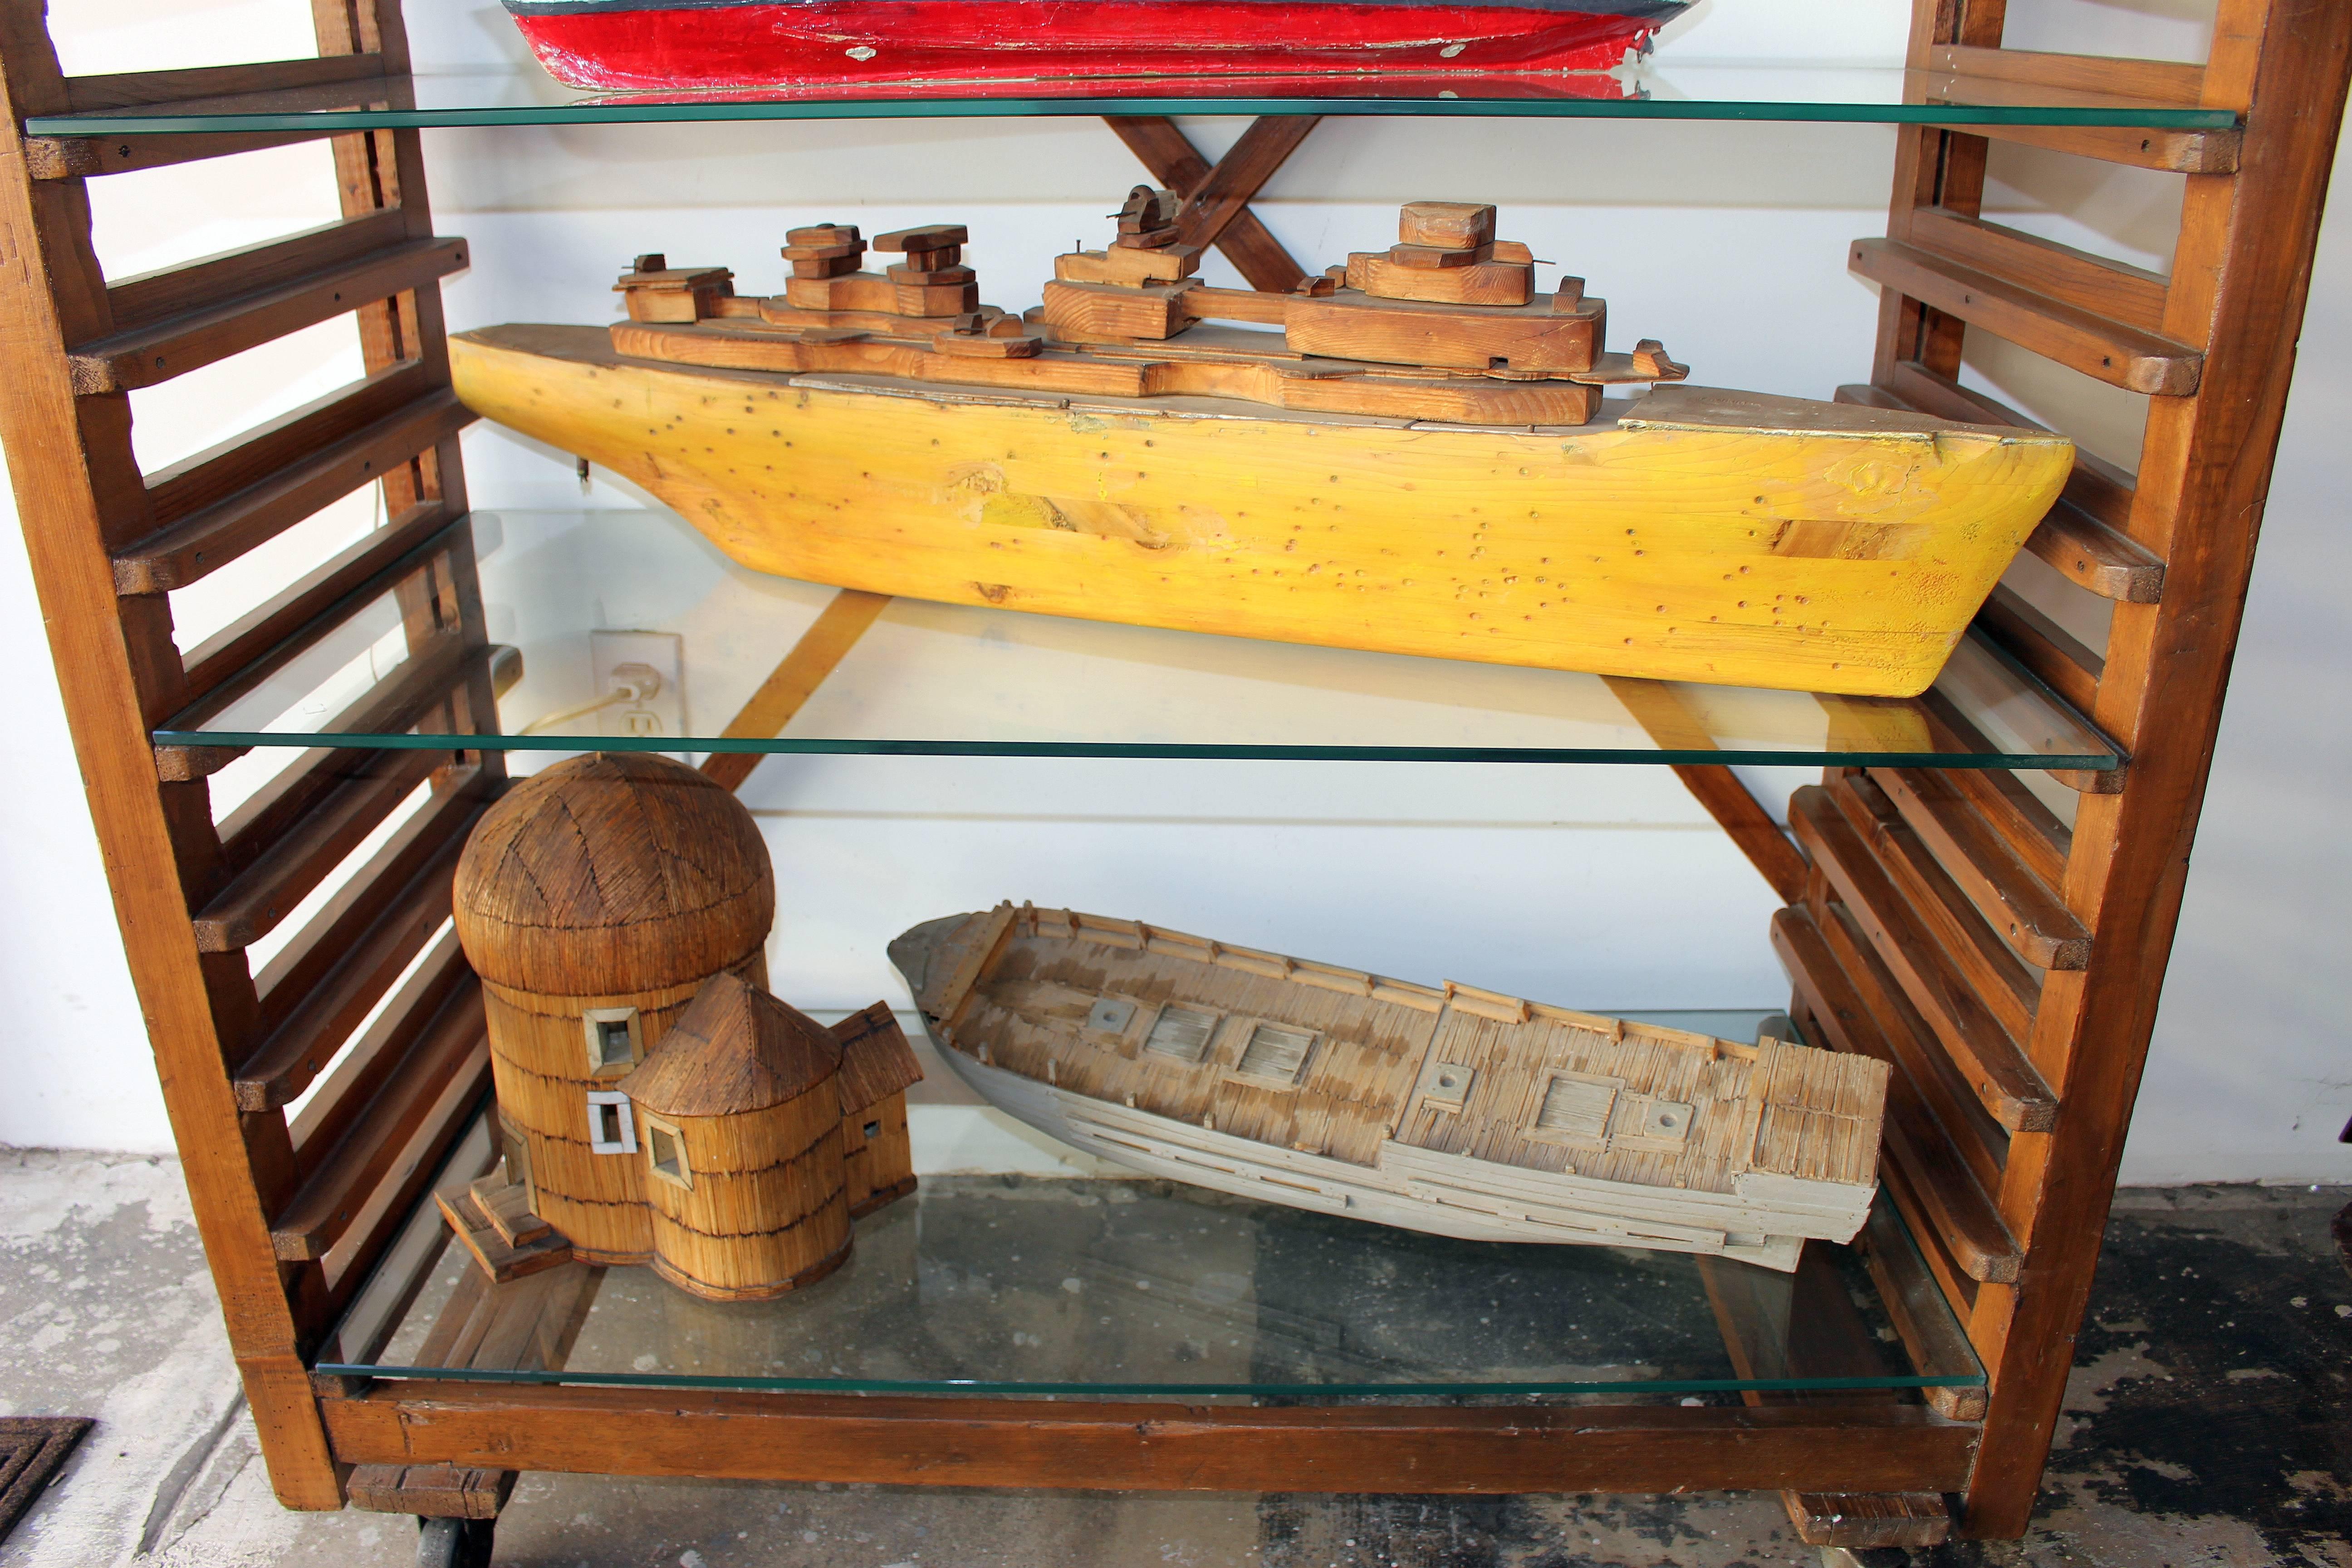  Italian boat collection. Bakers rack is unavailable,price is only for the boat collection a set of 5 boats, boats are various dimension .